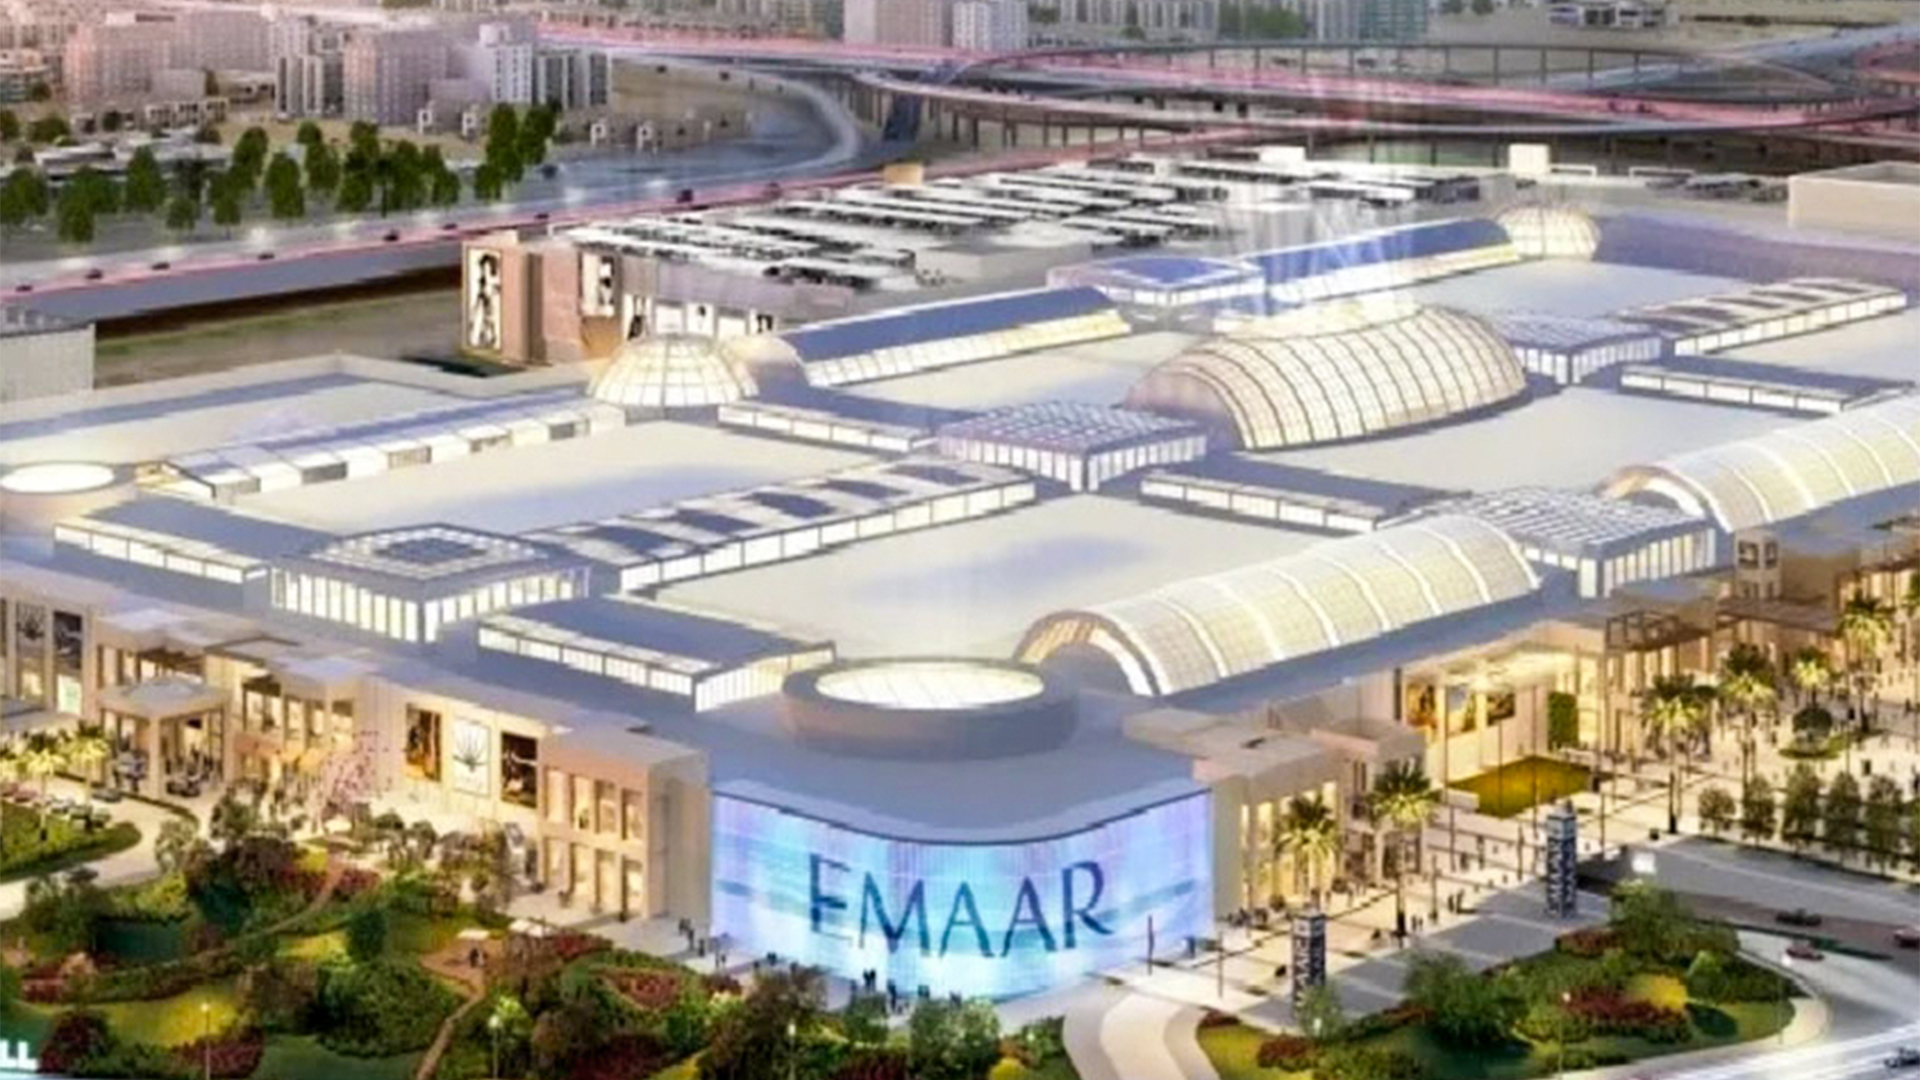 Dubai Hills Mall is open for business and adds 2m sq. ft. of prime retail space